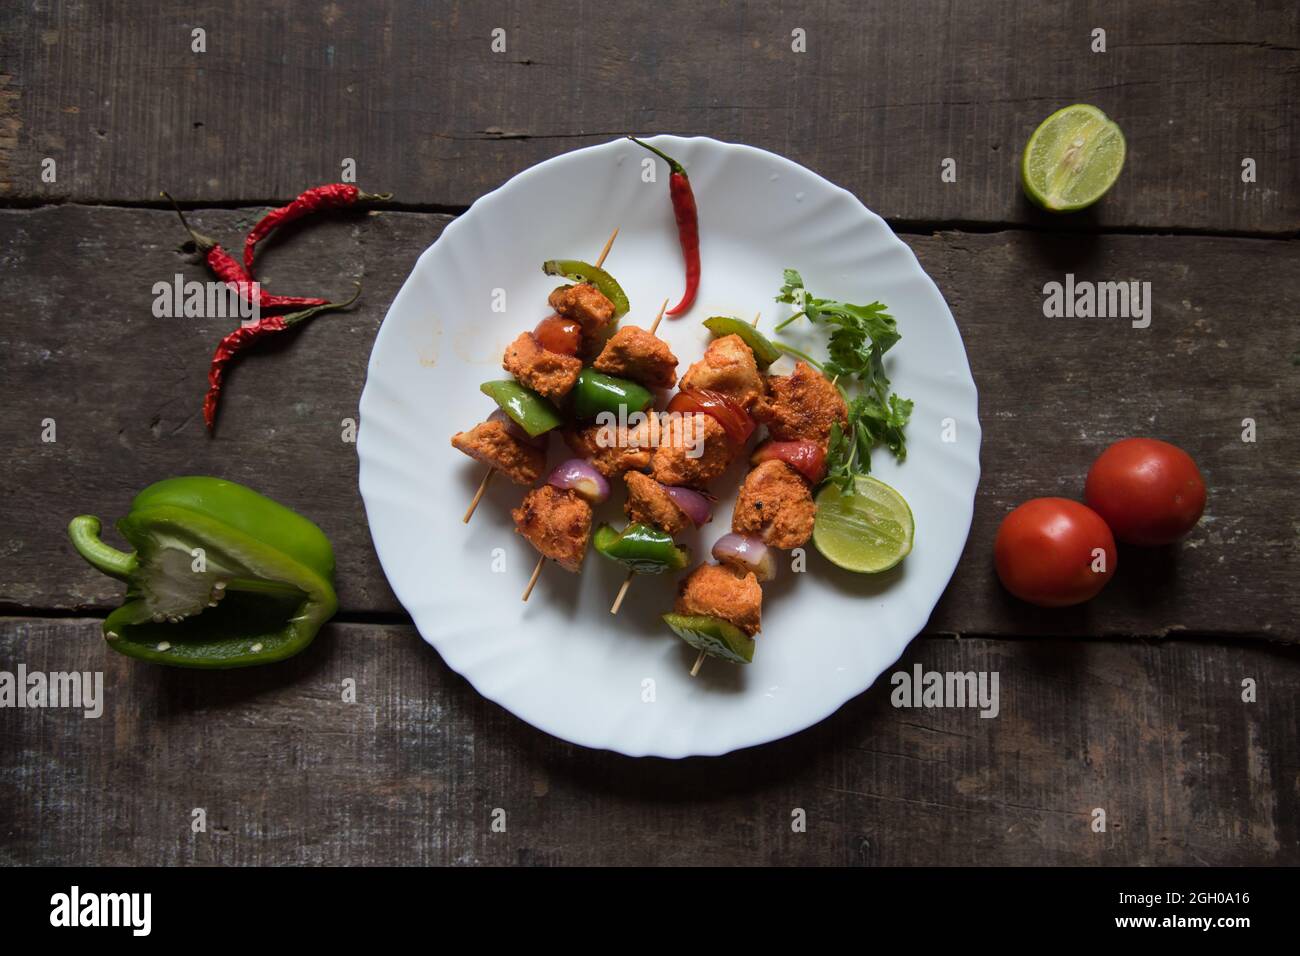 Chicken kebabs or doners grilled with saute vegetables in a white plate. Top view. Stock Photo